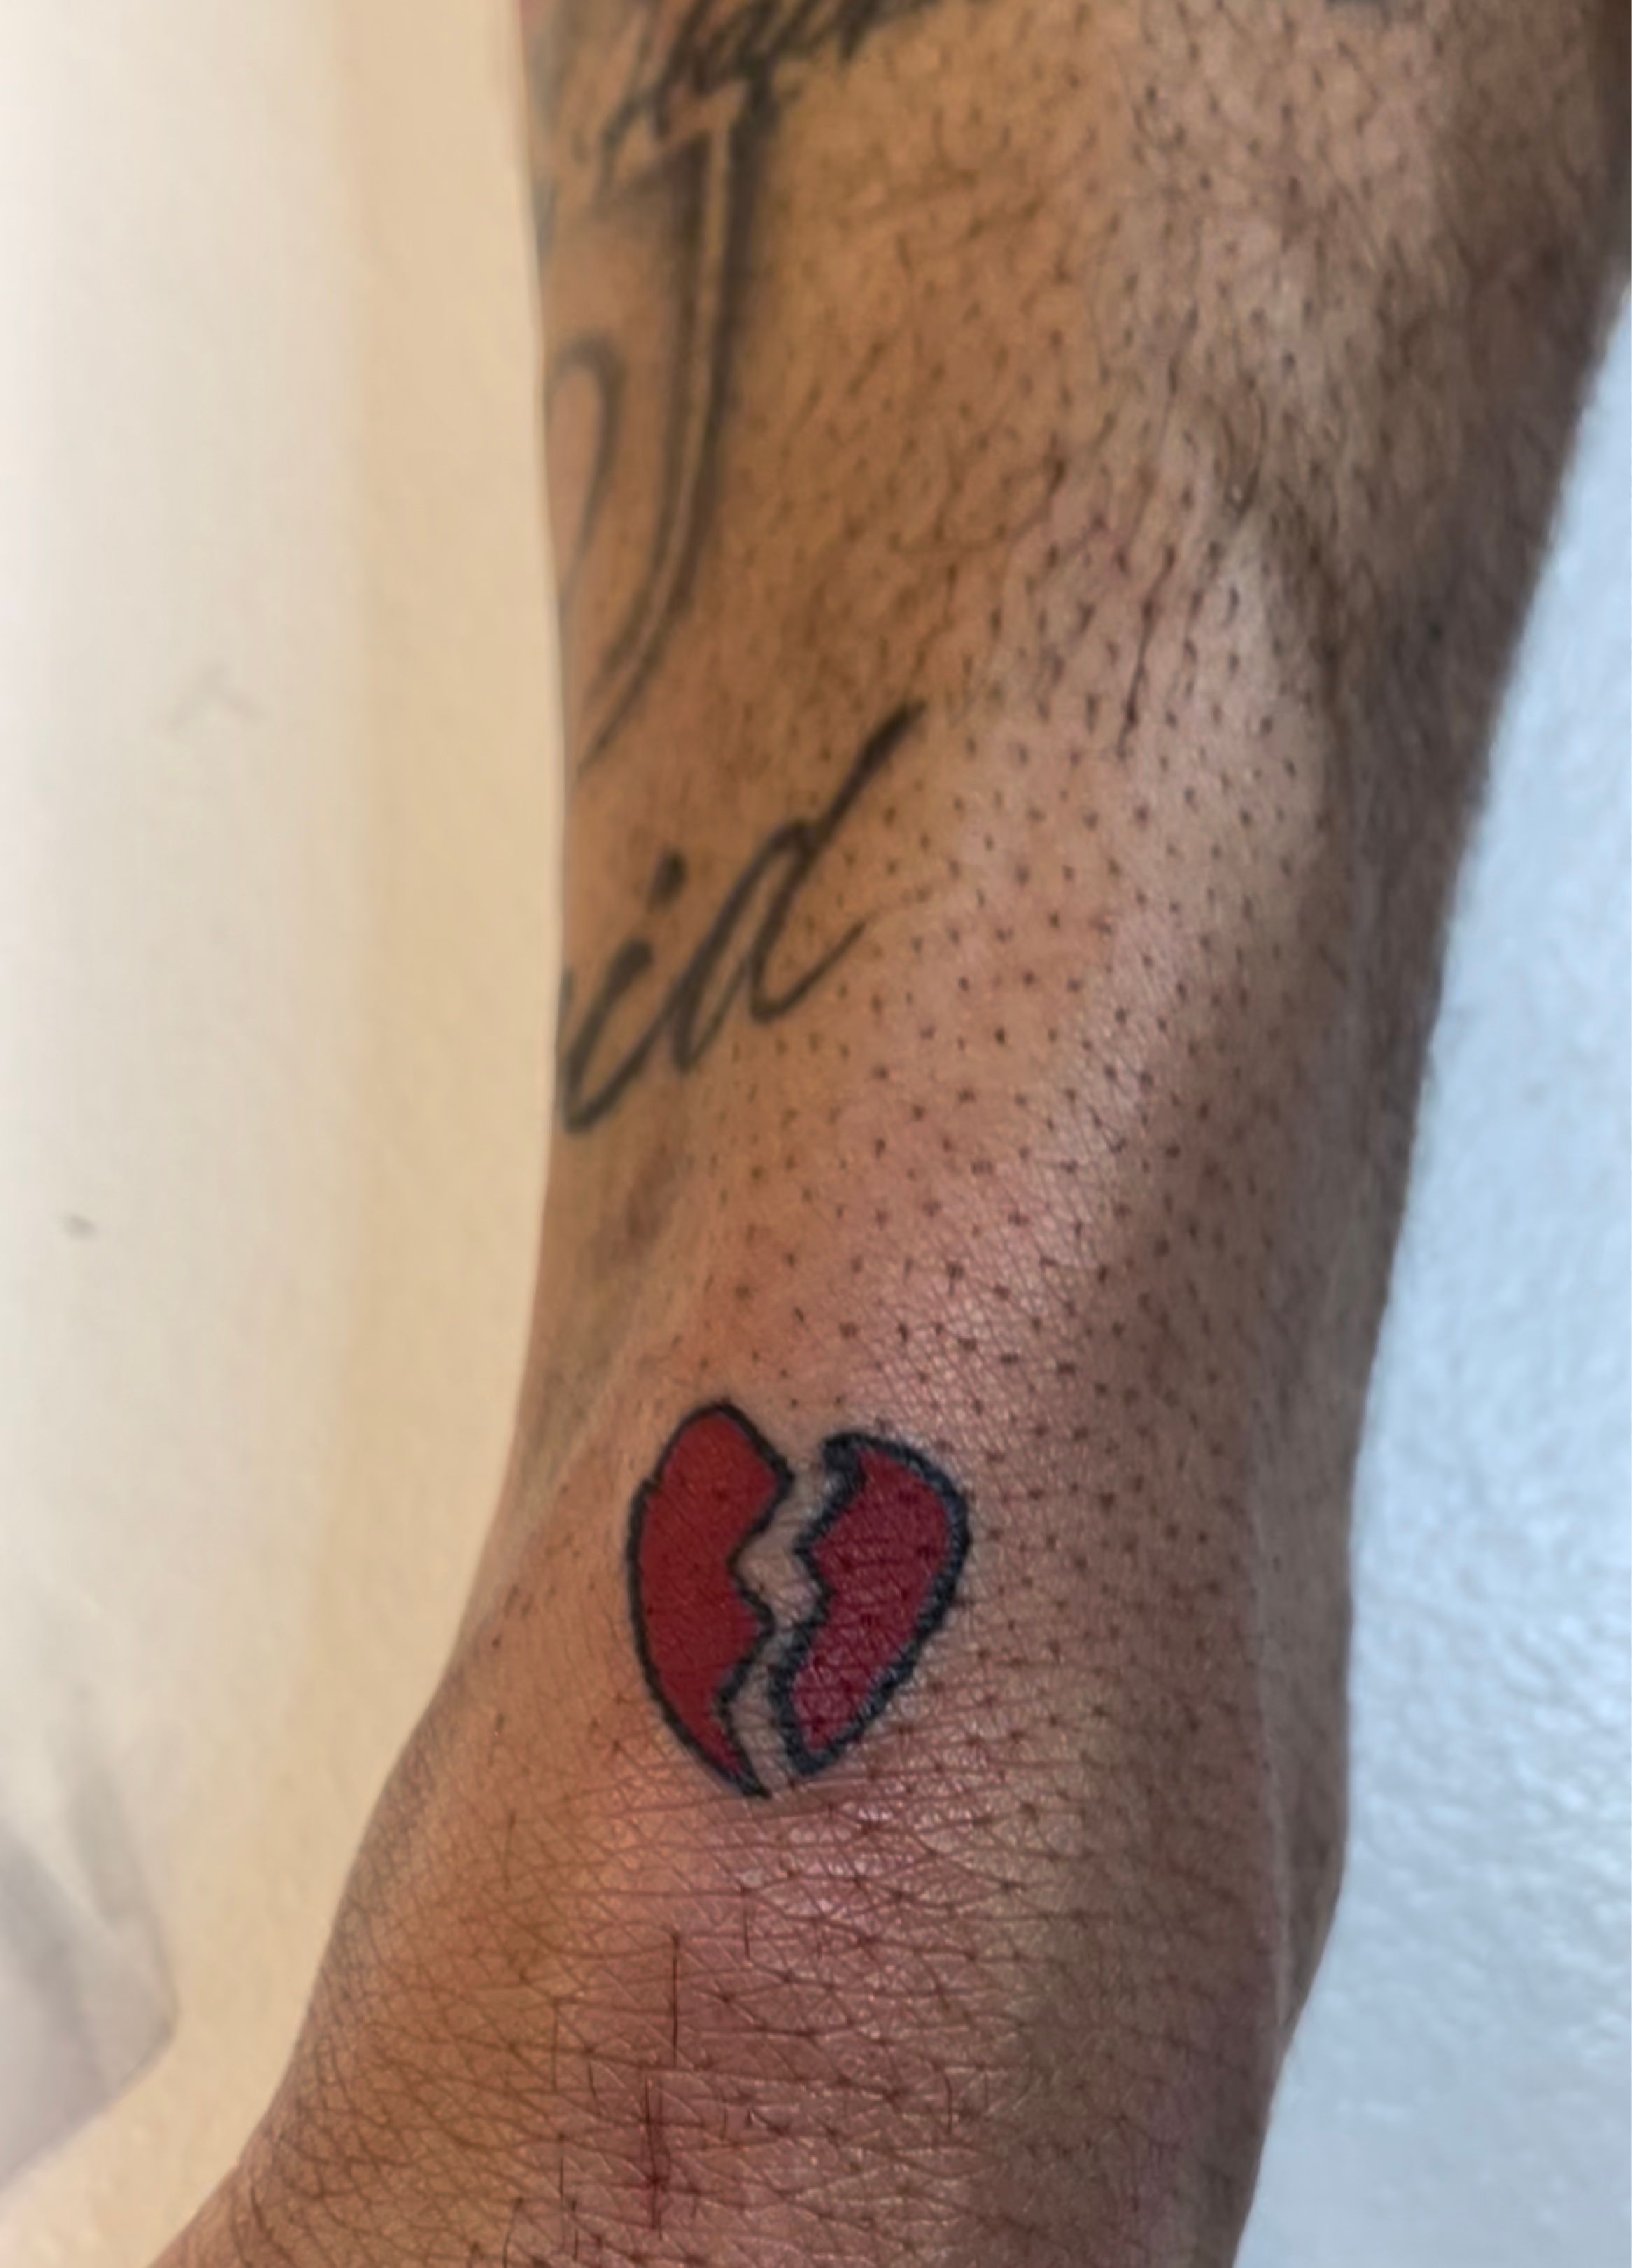 21 Broken Heart Tattoos To Fall In Love With • Body Artifact